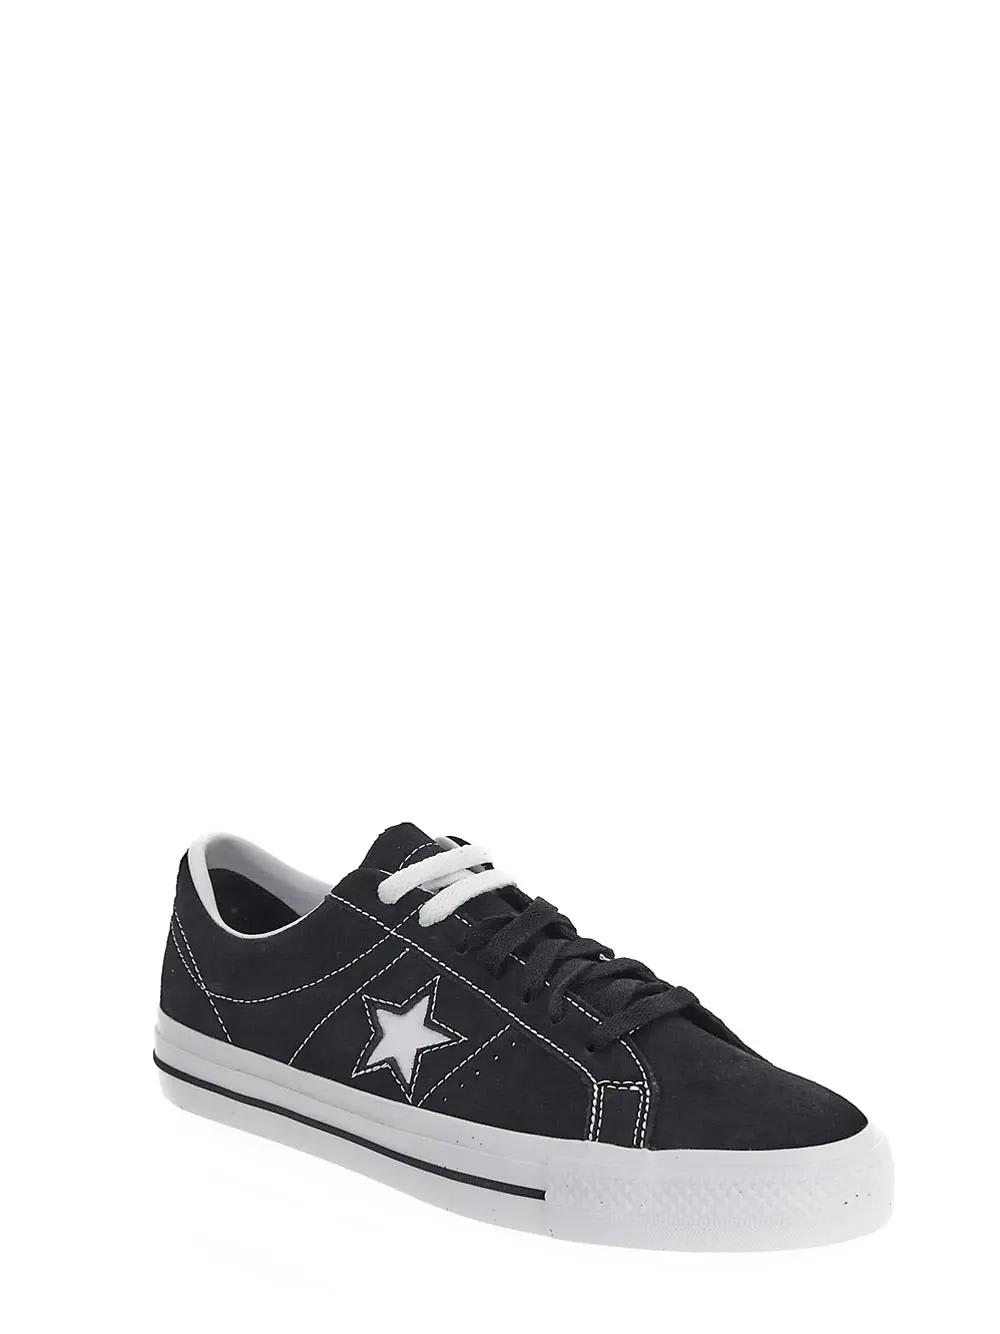 Shop Converse One Star Pro Sneakers In Black